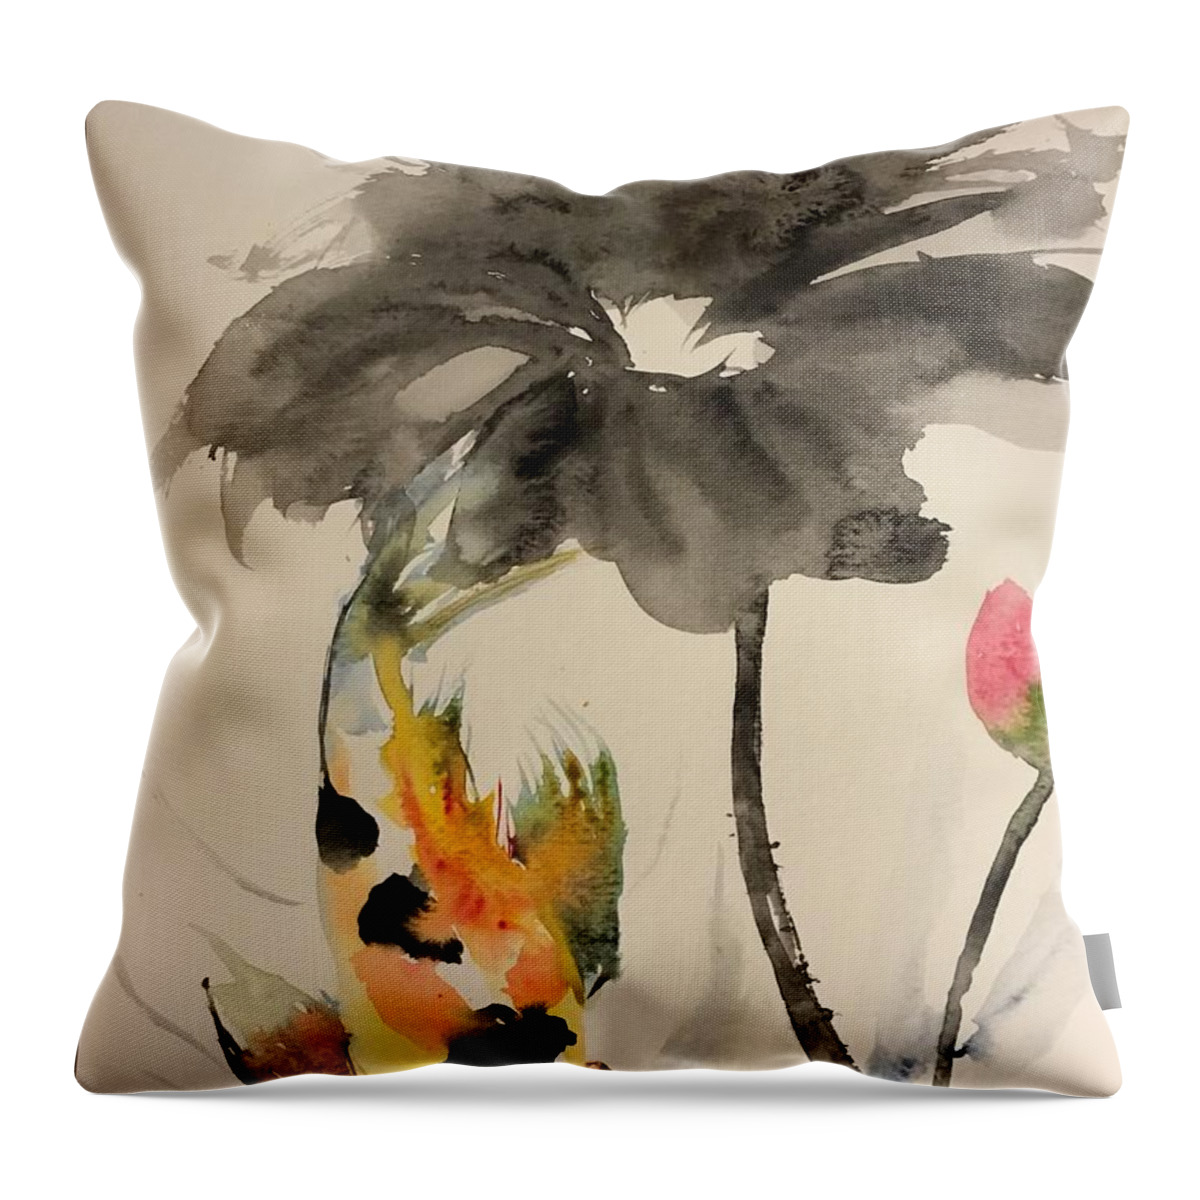 1242019 Throw Pillow featuring the painting 1242029 by Han in Huang wong